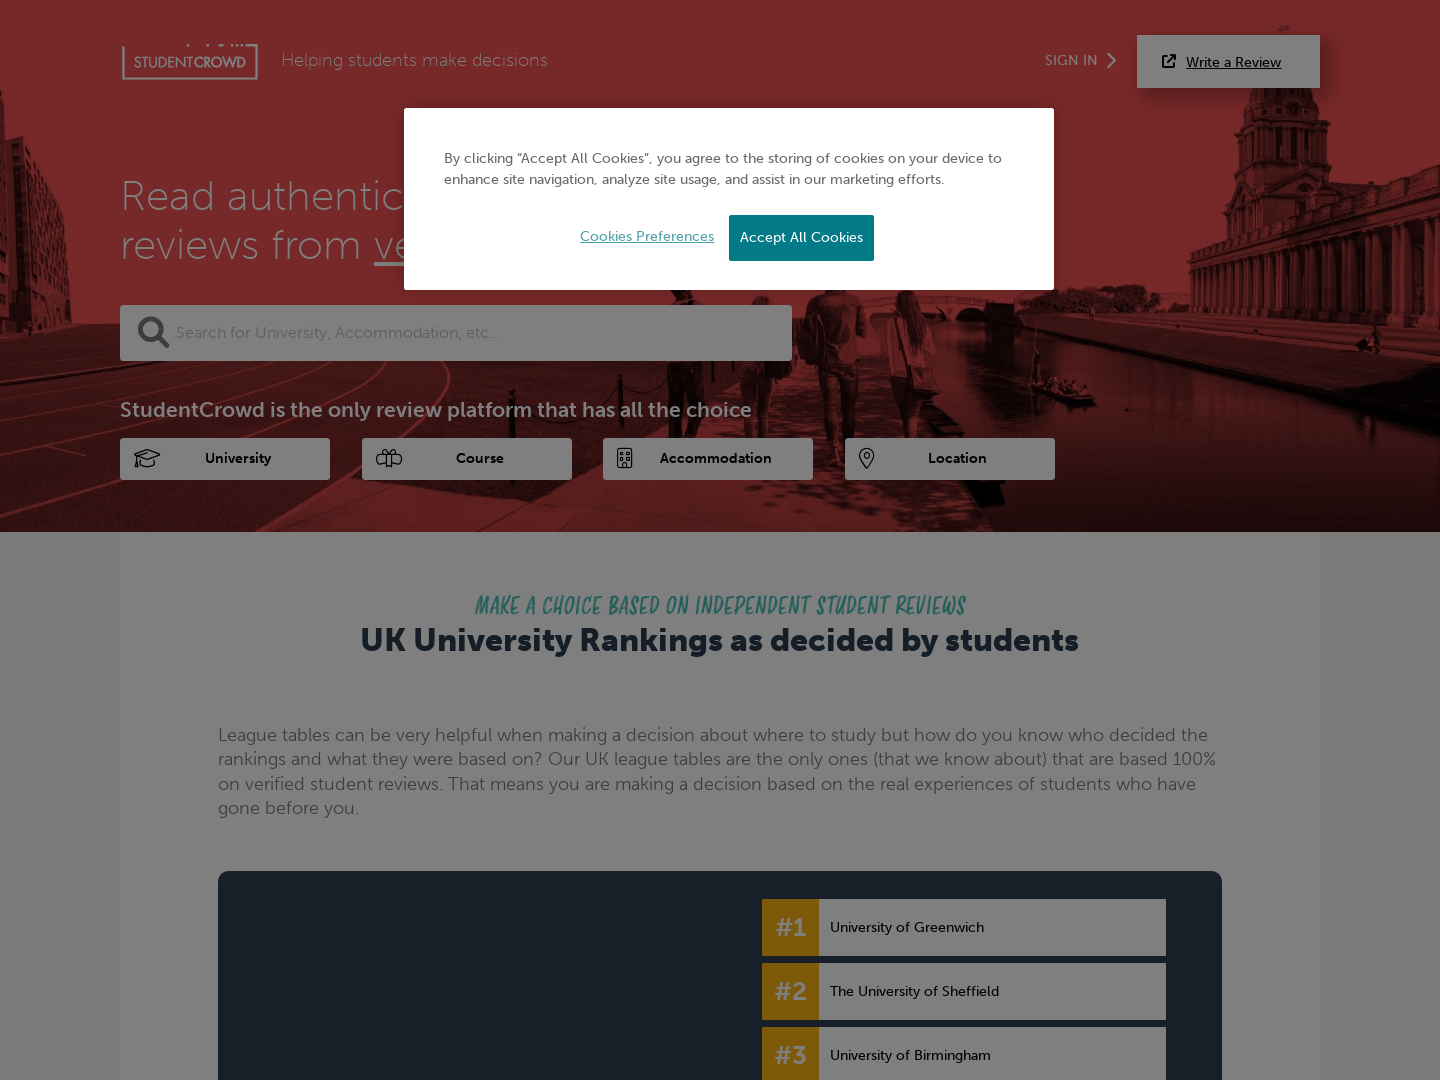 "StudentCrowd secures £2.5M funding to expand platform"